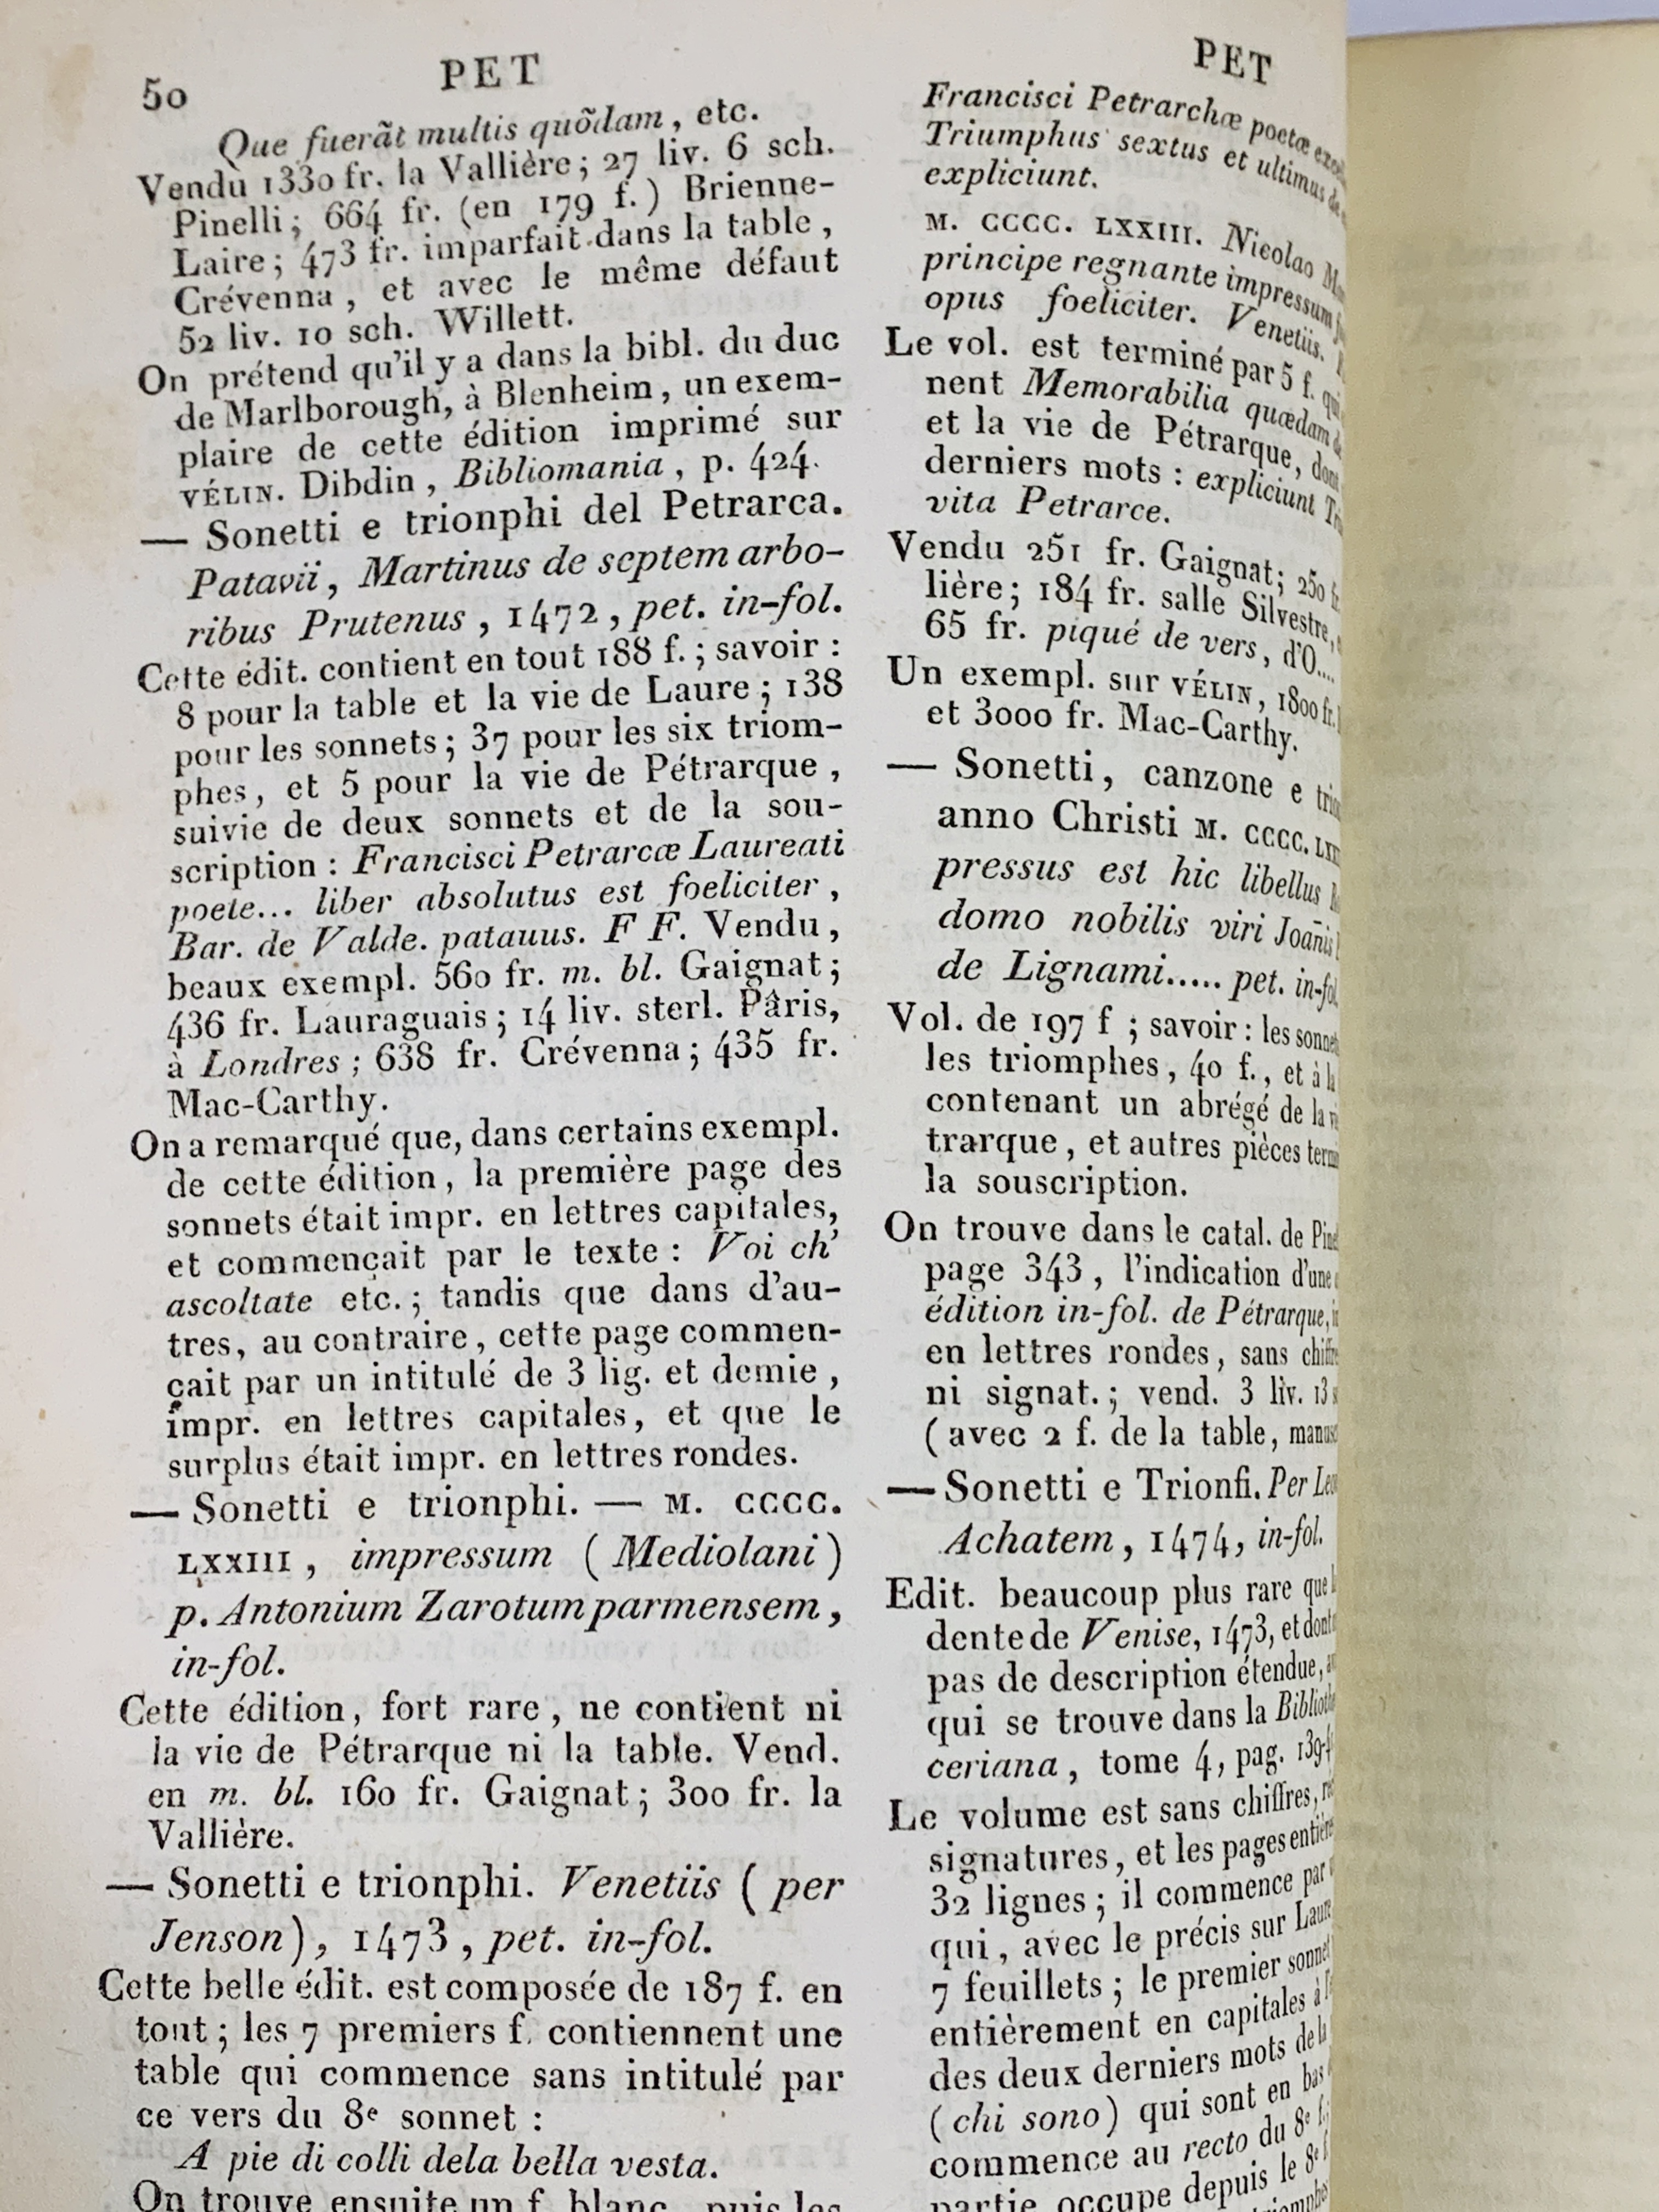 Charles Brunet "The Book Lover's Manual" (text in French) 1820-34 - Image 9 of 9